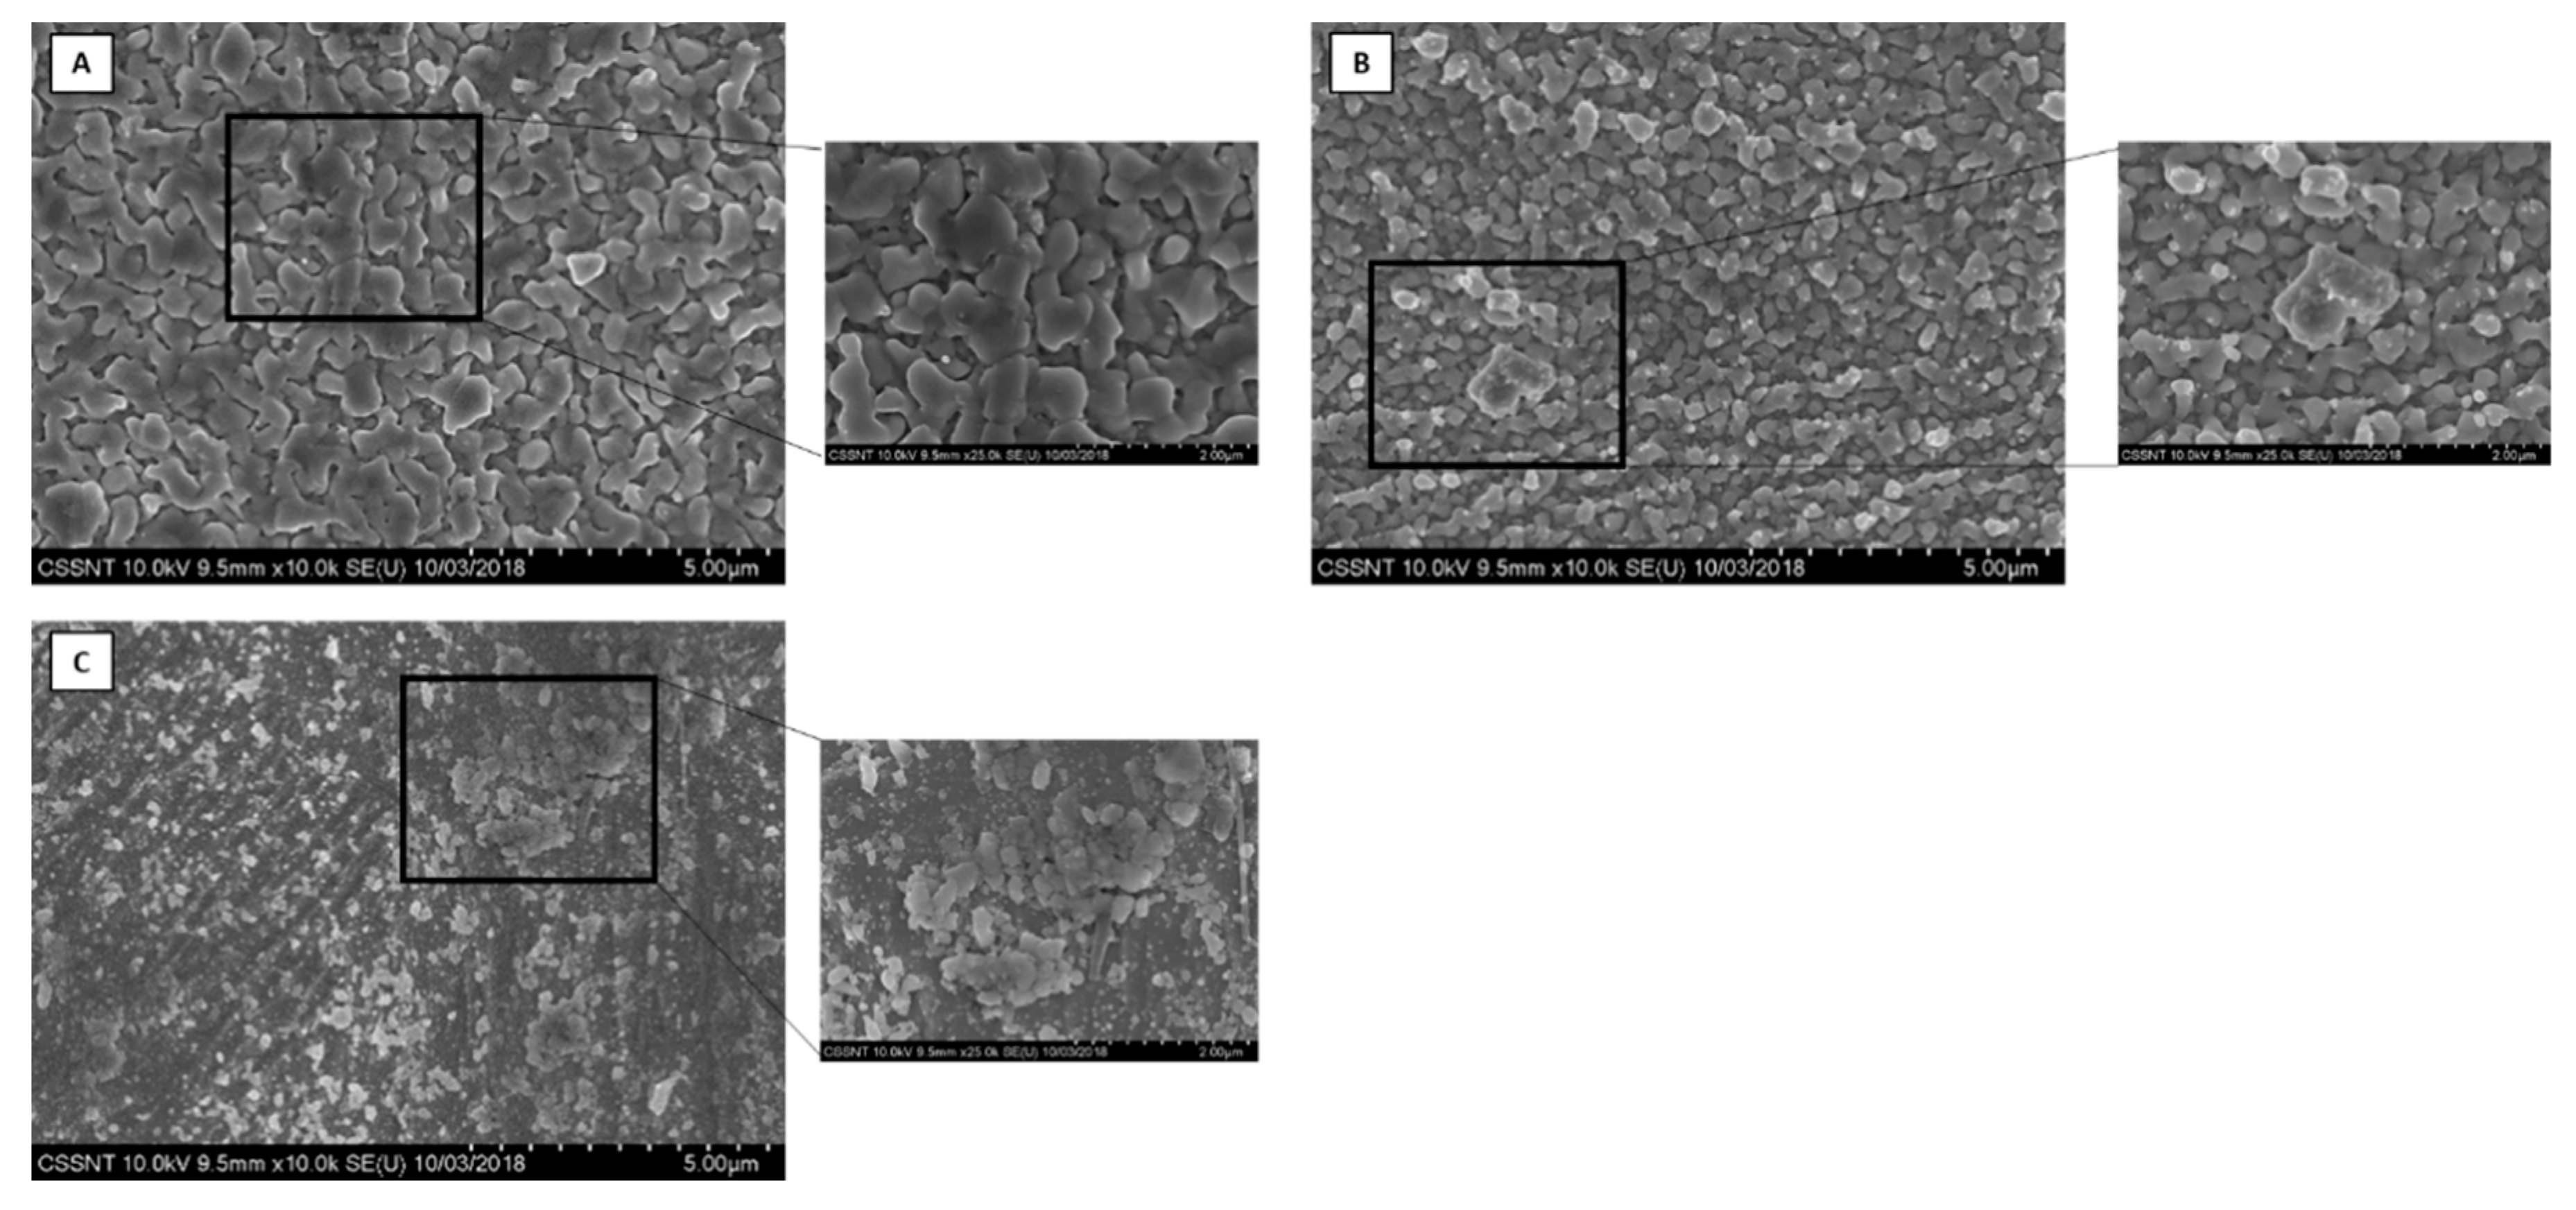 Coatings Free Full Text Electrodeposition Of Sn And Sn Composites With Carbon Materials Using Choline Chloride Based Ionic Liquids Html